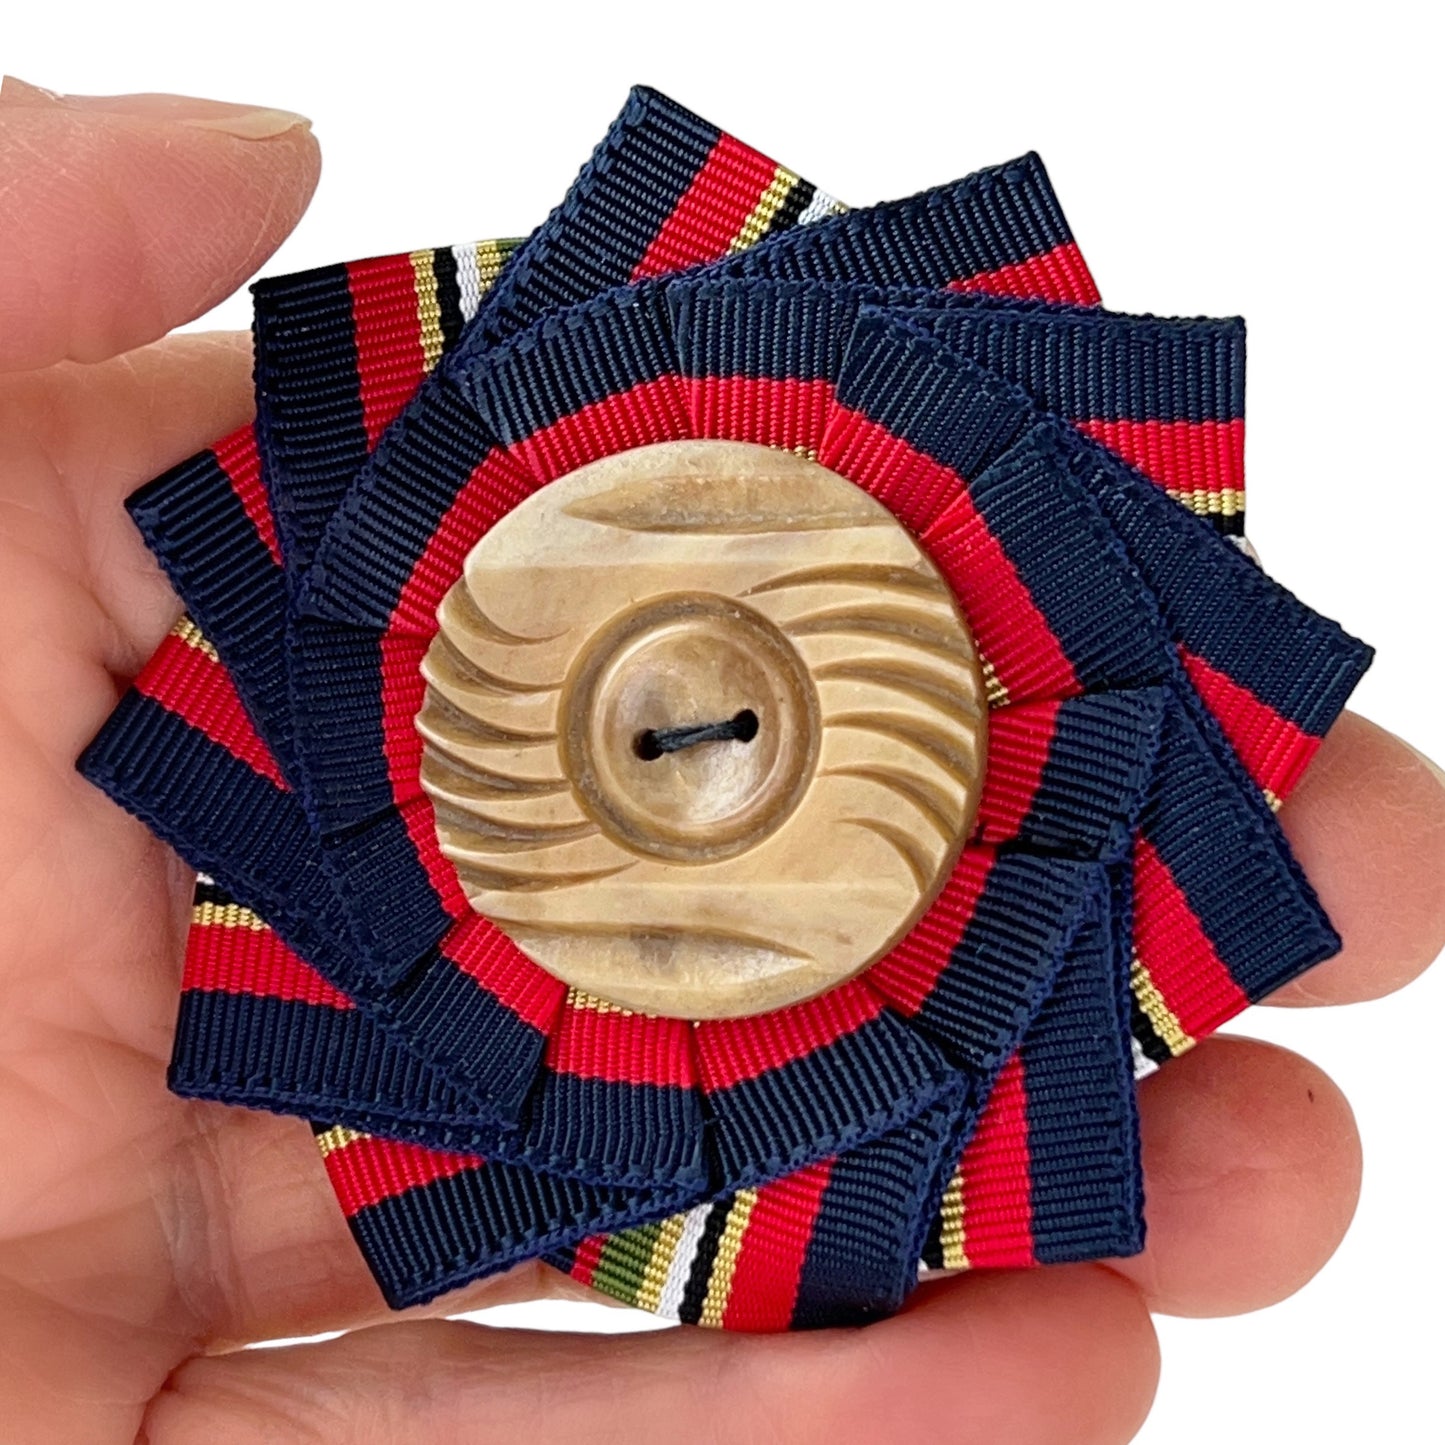 Cockade Ribbon Button Brooch Navy Red 1920 Celluloid Coat Button